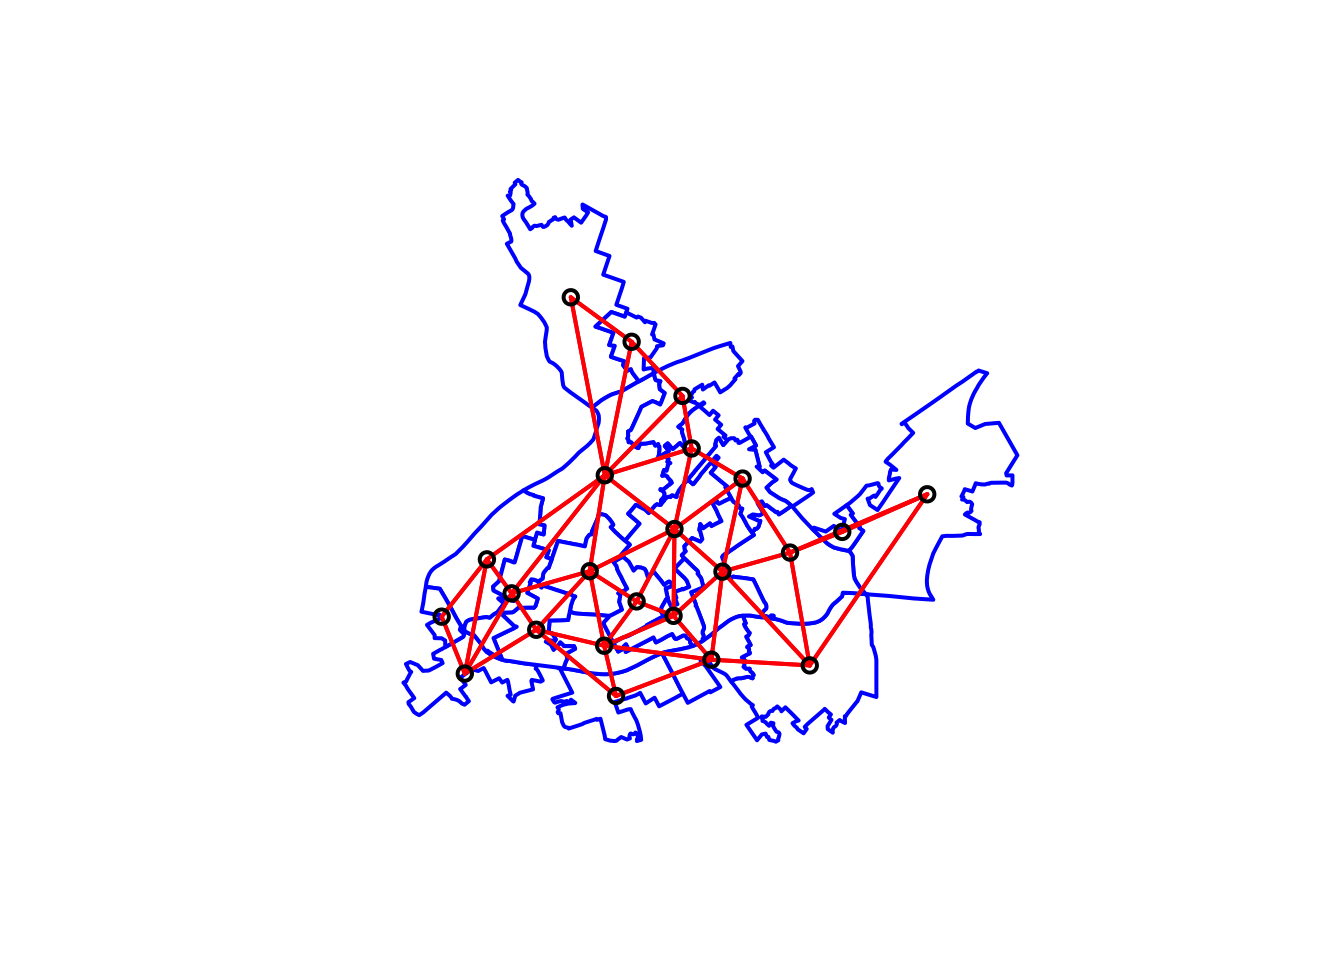 A handful of the LSOAs from the centre of Manchester have been outlined in blue, with a small black circle in the centre of each one. Any two that share a border also have a red line connecting their central black circles, including ones that only share a corner.